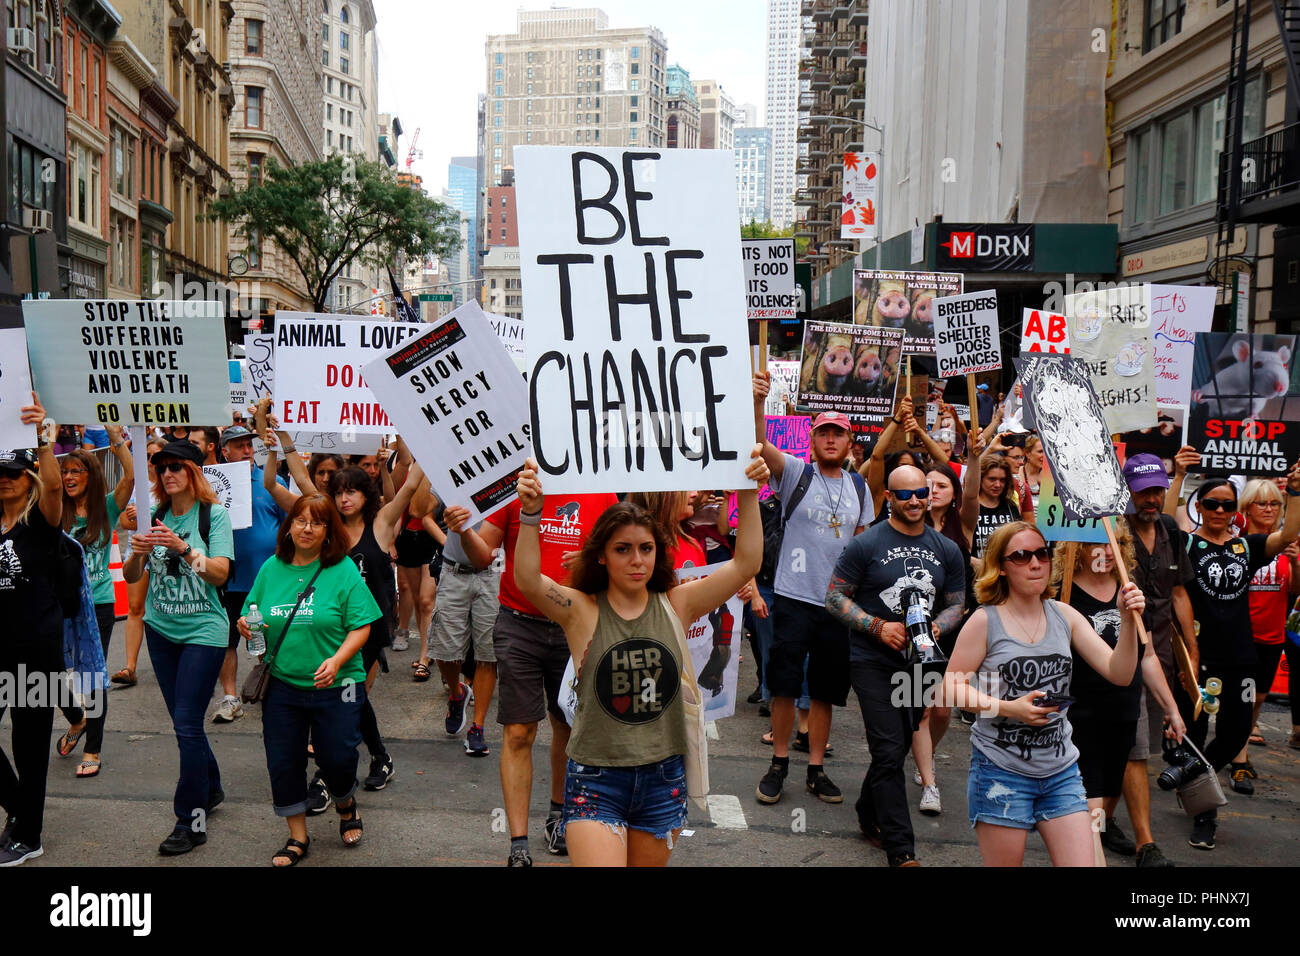 New York, NY, USA. 1st September, 2018. A person holds a 'Be The Change' sign during the Official Animal Rights March NYC. Stock Photo